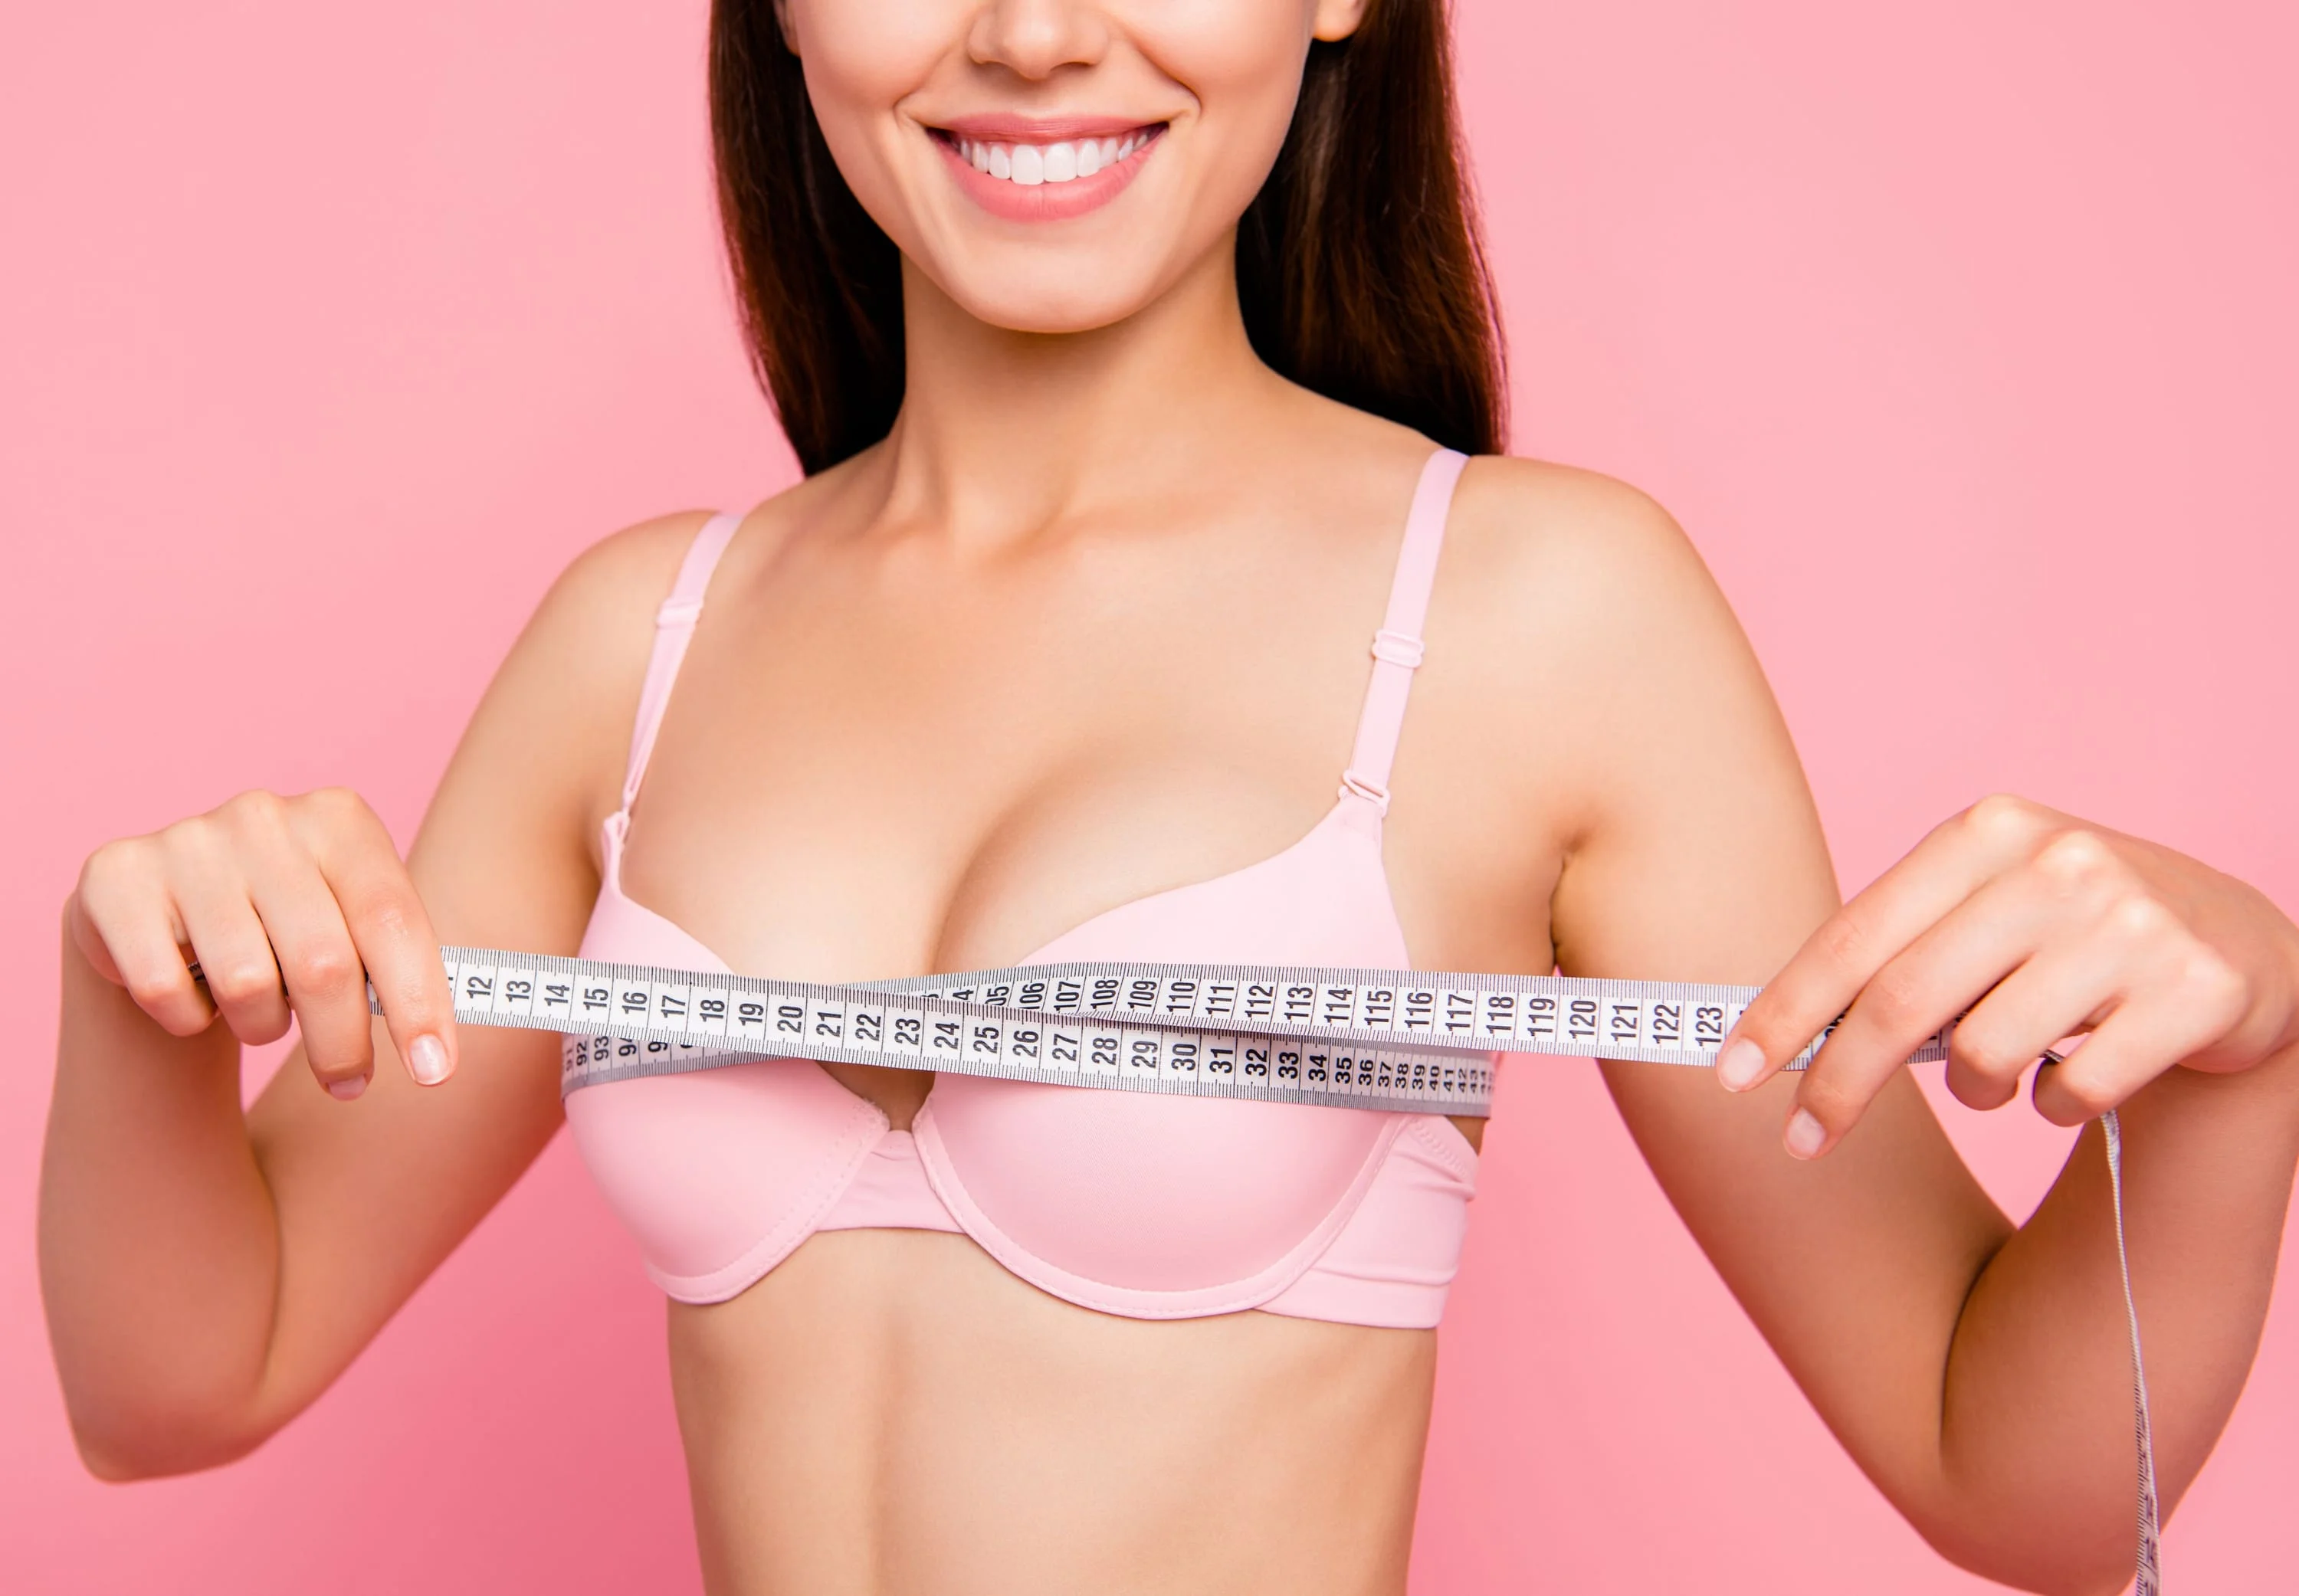 Breast Reduction - The Centre, P.C.